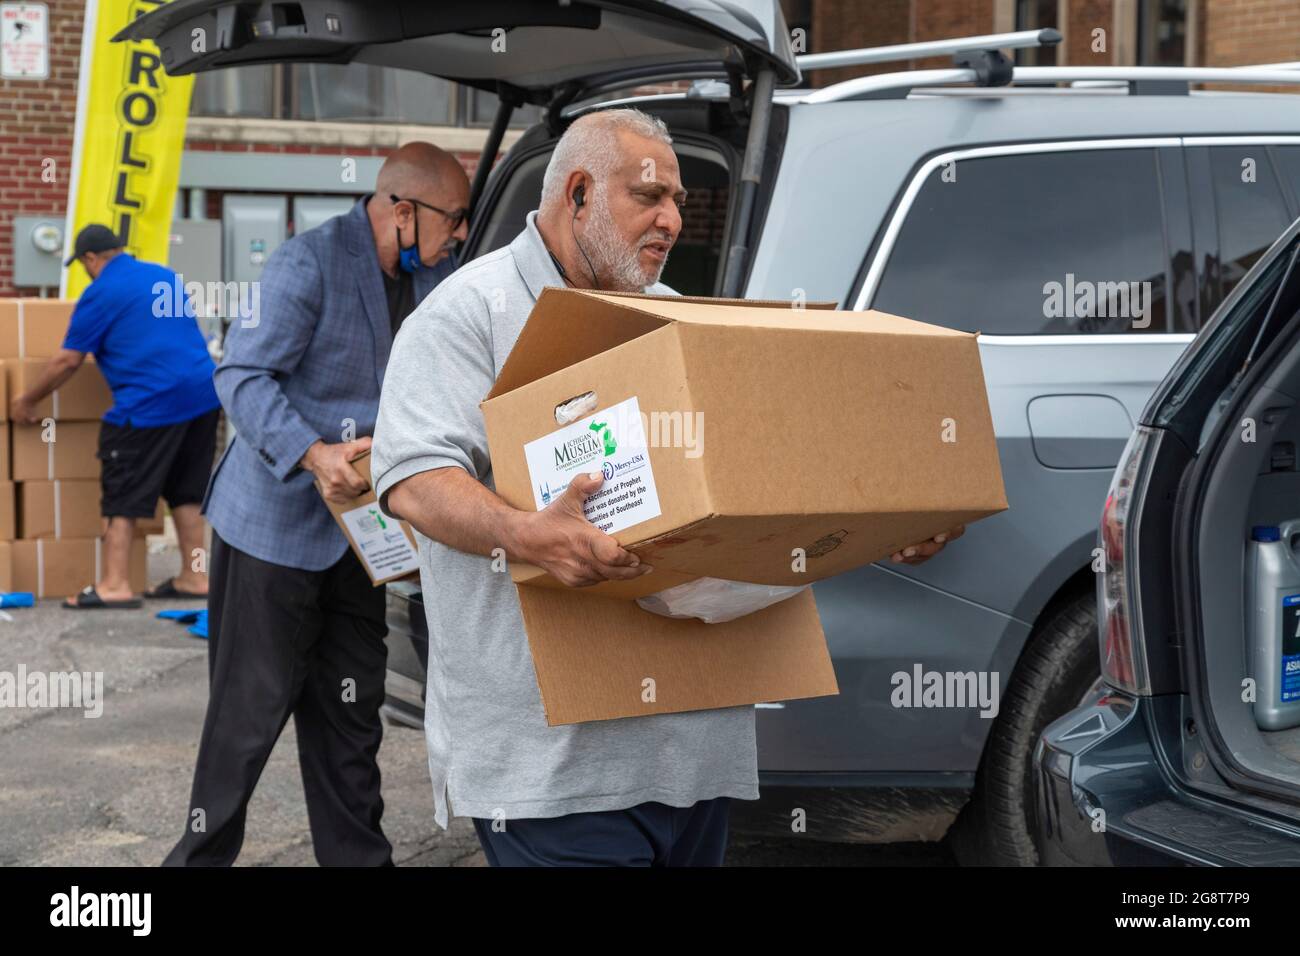 Detroit, Michigan, USA. 22nd July, 2021. Members of the Michigan Muslim Community Council unload packages of lamb for distribution to the poor during the Eid al-Adha holiday. Eid al-Adha commemorates the story, common to Muslims and Christians, in which God asked Ibrahim (Abraham) to sacrifice his son, but at the last minute substituted a lamb instead. During the holiday Muslims butcher a lamb, keeping part of the meat and donating the rest to anyone in need. Credit: Jim West/Alamy Live News Stock Photo